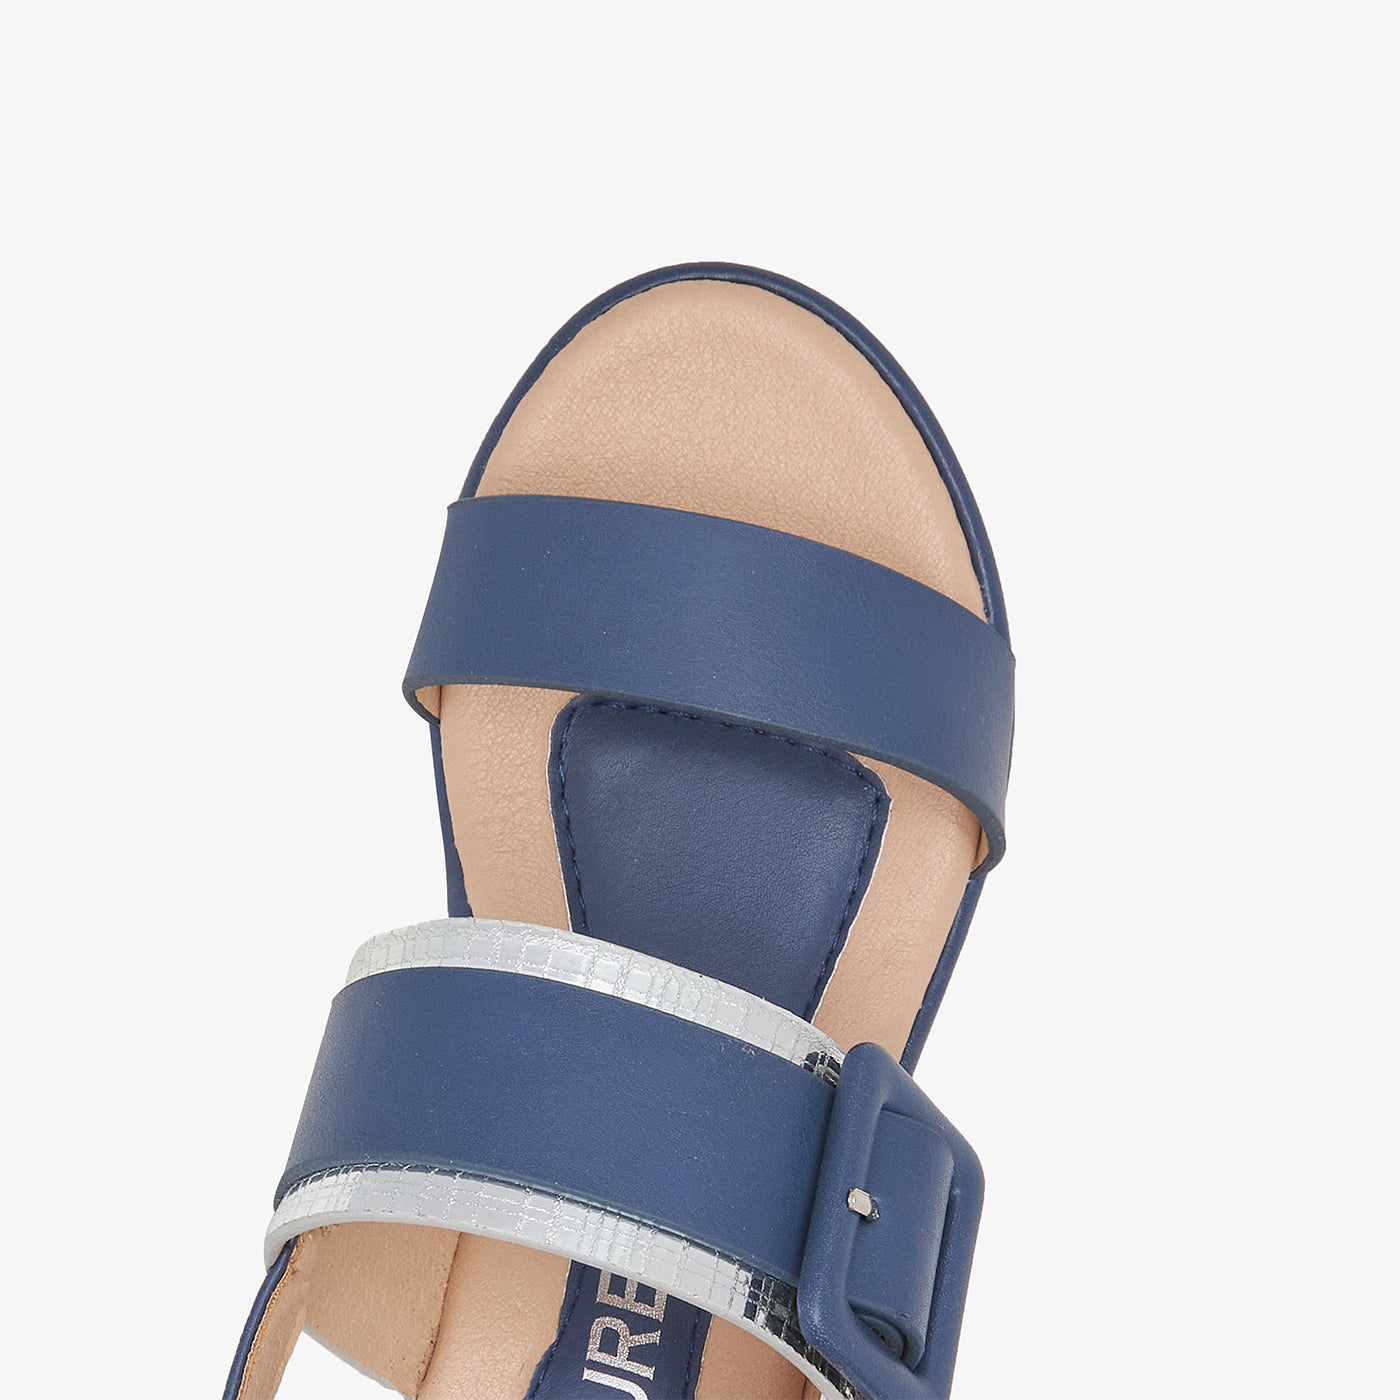 Double Strap Buckled Sandals